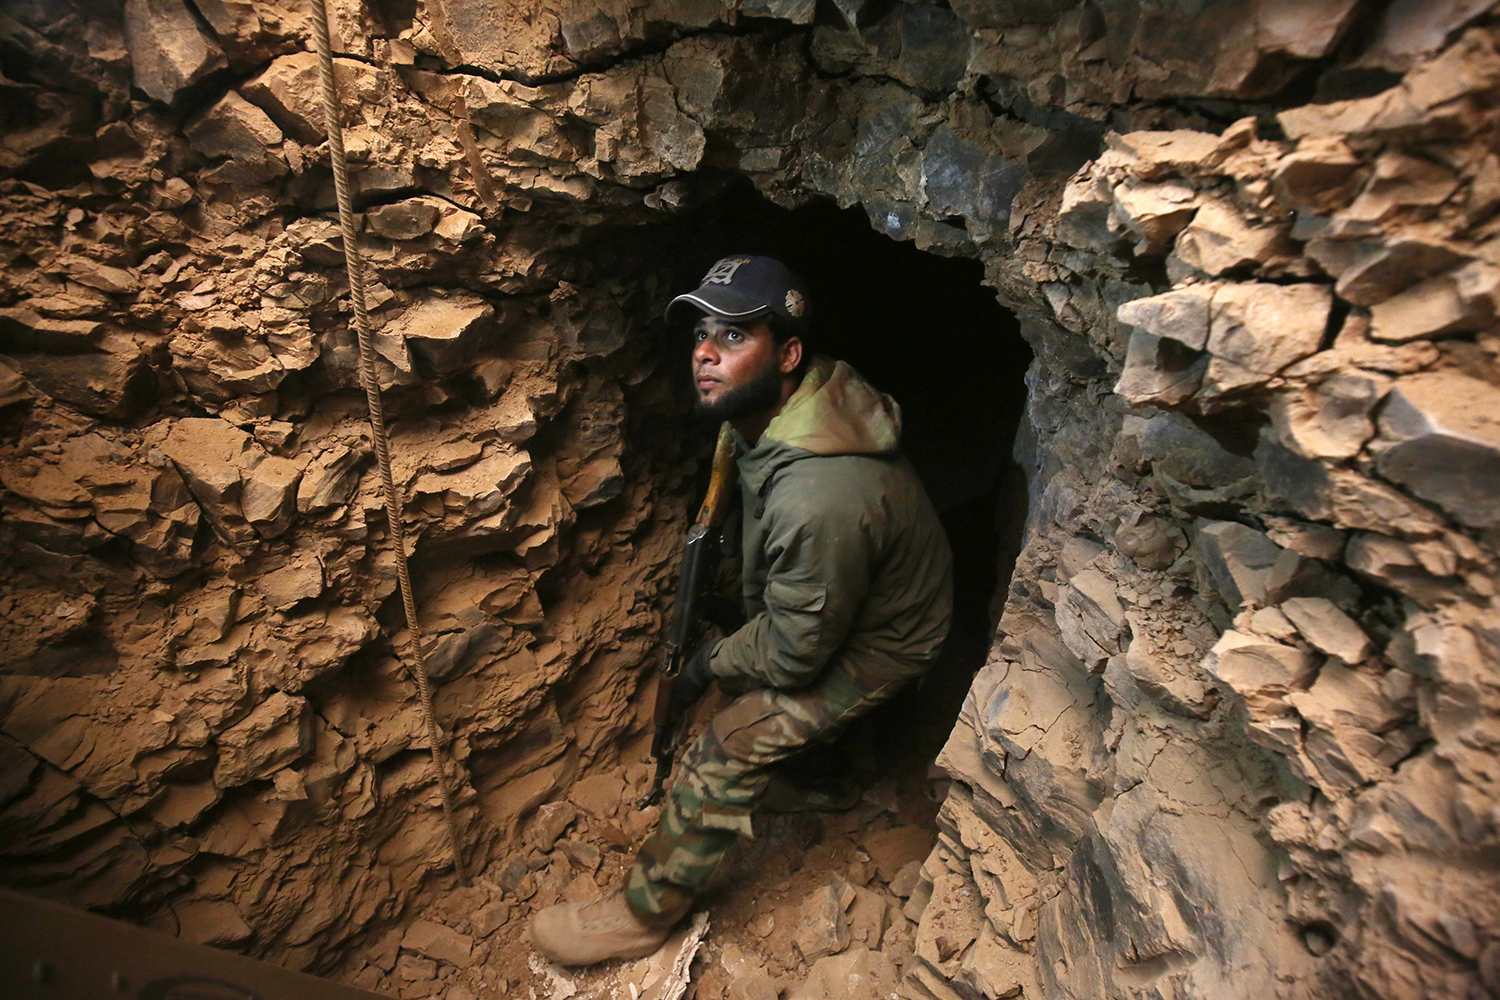 TOPSHOT - An Iraqi Shiite fighter from the Hashed al-Shaabi (Popular Mobilisation) paramilitary forces inspects an underground tunnel in the town of Tal Abtah, south of Tal Afar, on December 10, 2016, after they retook the area during a broad offencive to retake the city of Mosul from Islamic State (IS) jihadists. Hashed al-Shaabi (Popular Mobilisation) paramilitary forces have made progress in recent weeks on a western front targeting Tal Afar town on the road linking Mosul to Syria. On December 8, 2016, the paramilitary forces were clearing Tal Abtah of bombs and booby traps after a fierce, days-long fight to retake it. / AFP PHOTO / AHMAD AL-RUBAYE / TT / kod 444